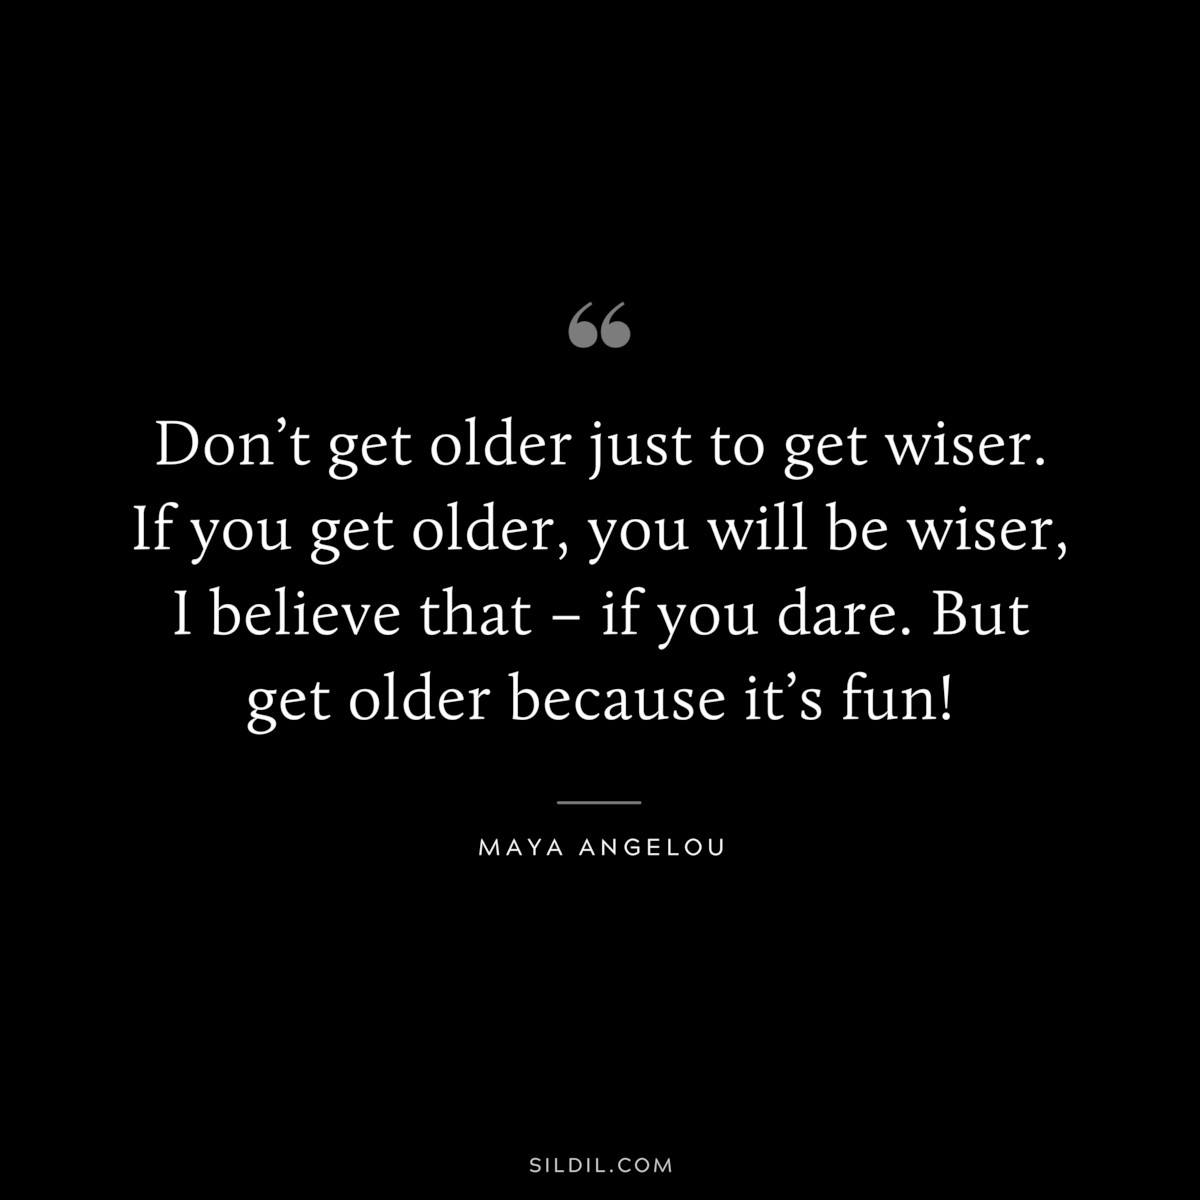 Don’t get older just to get wiser. If you get older, you will be wiser, I believe that – if you dare. But get older because it’s fun! ― Maya Angelou